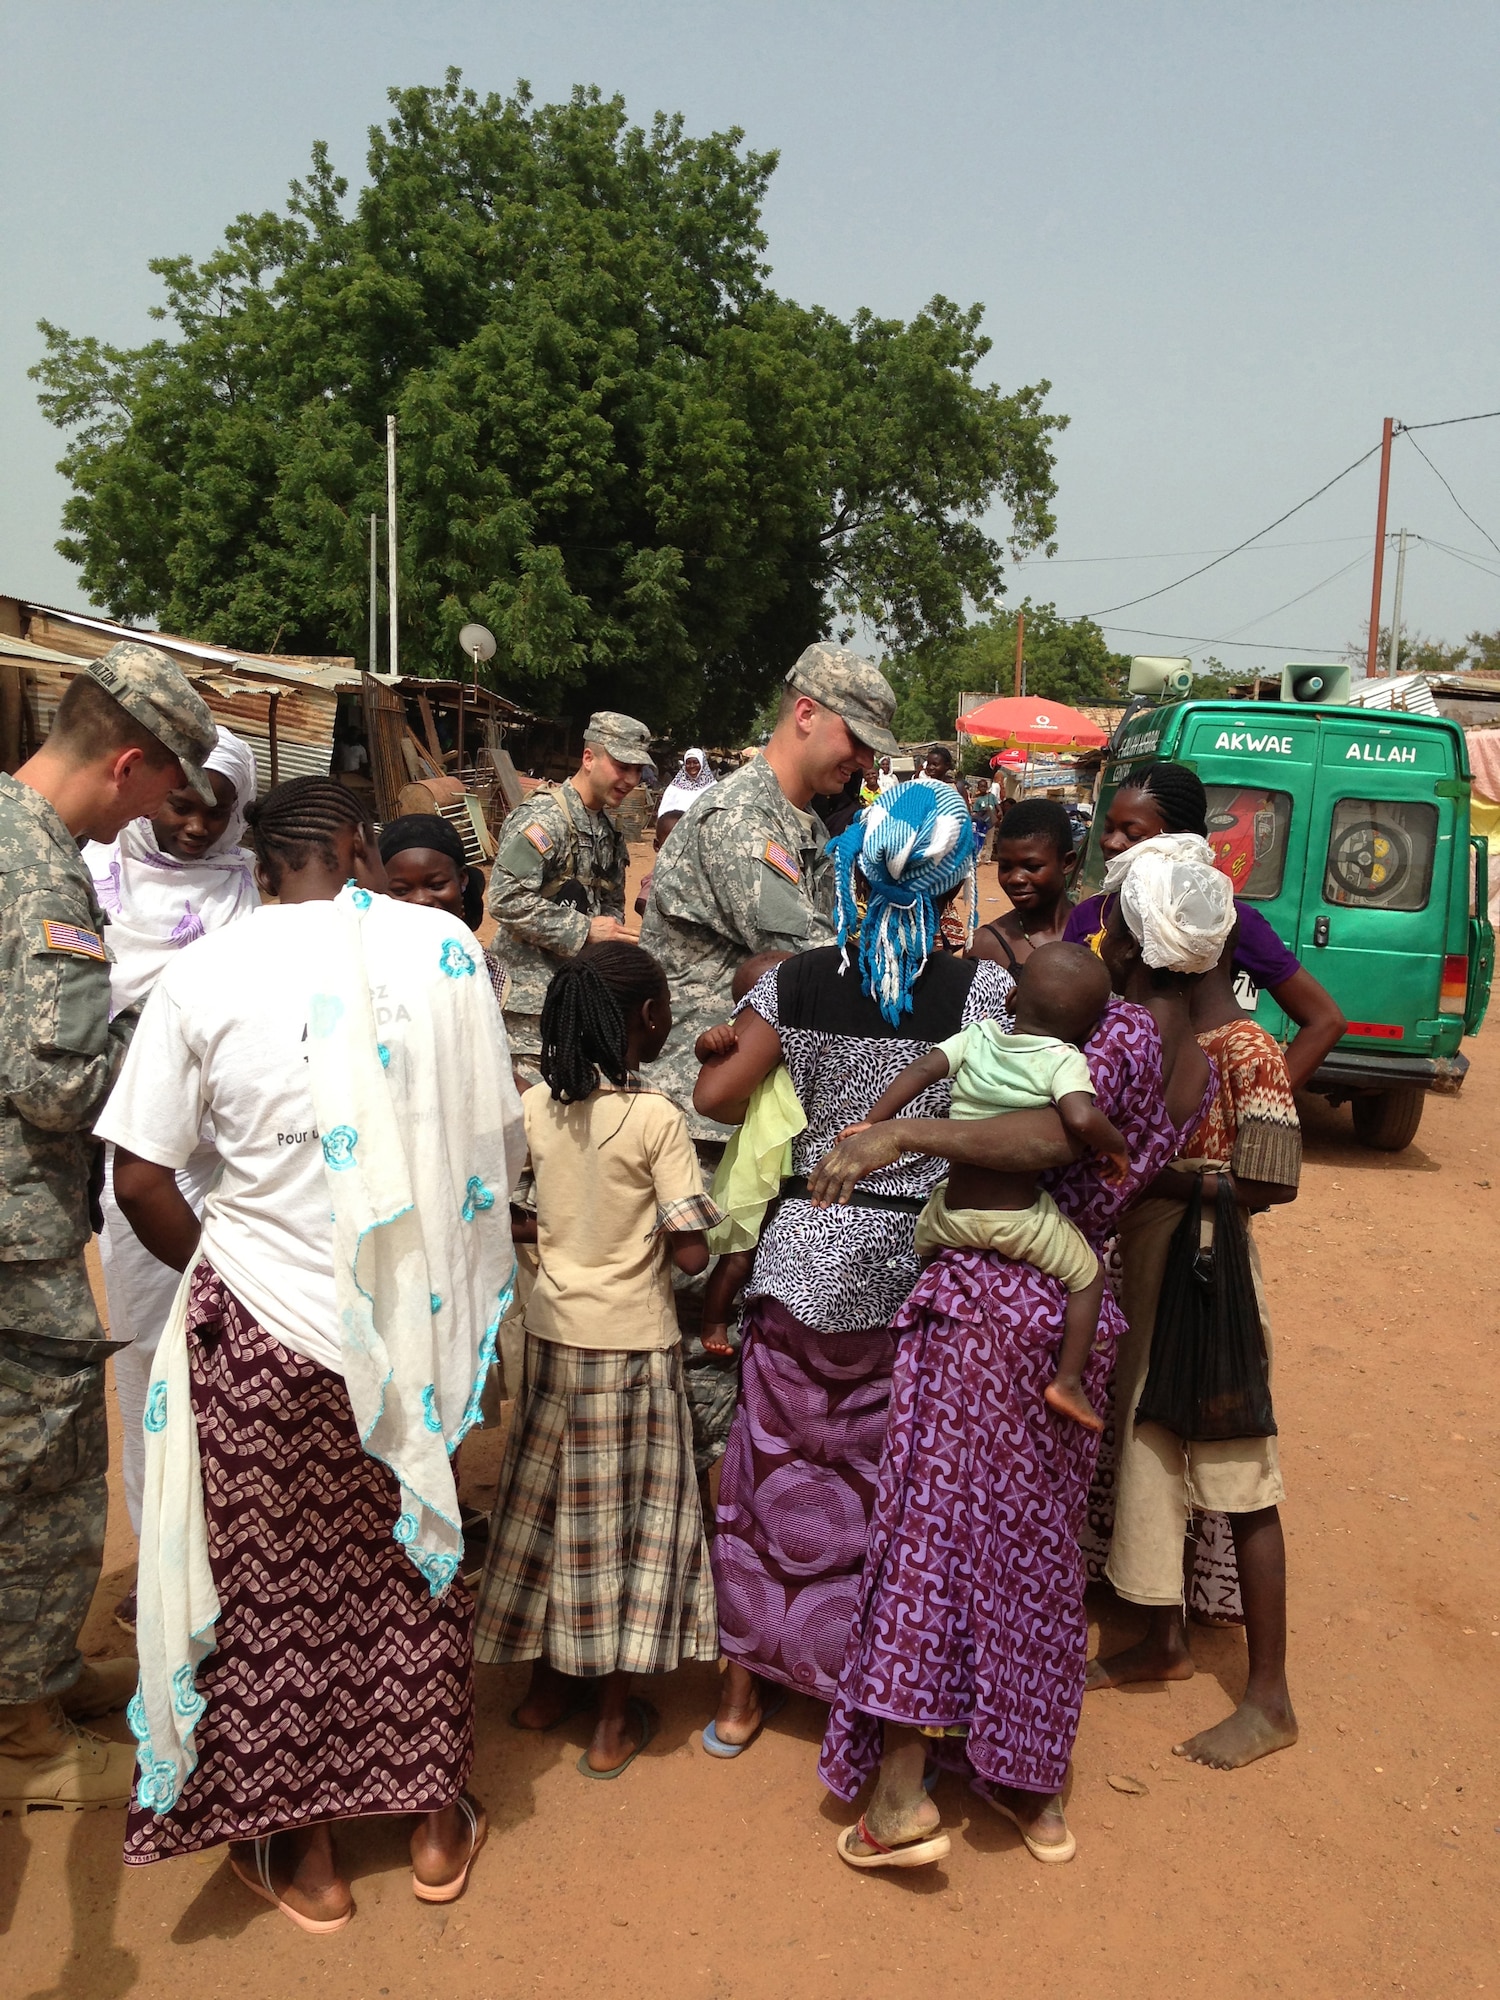 U.S. Army Cadets participating in the U.S. Army Cadet Command’s Cultural Understanding and Language Proficiency Program greet children and shop owners in the city of Po, Burkina Faso, in June 2014. The Cadets were visiting the African nation to strengthen cultural awareness and foreign language skills while training with Burkinabe officer cadets at the Georges Namoano Military Academy. (Courtesy photo)